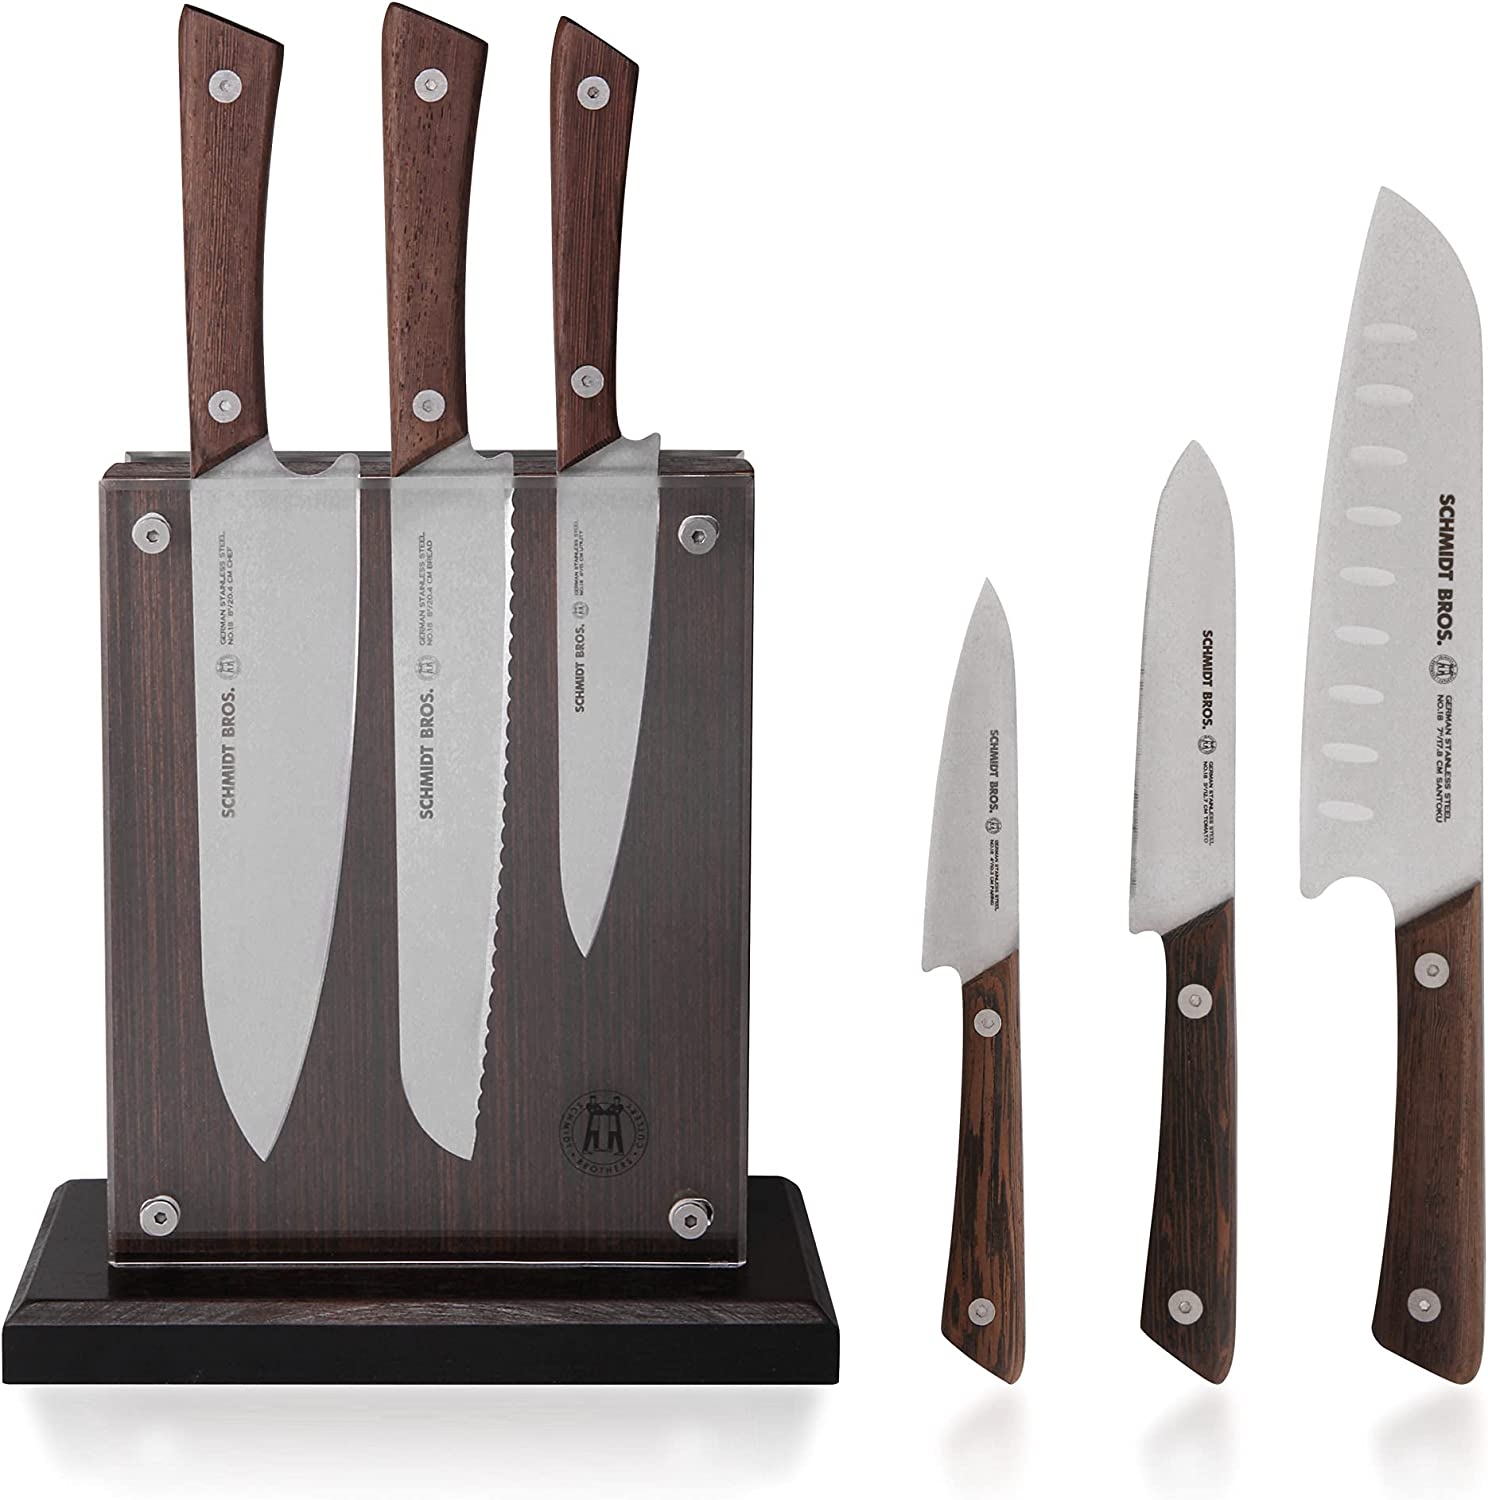 Schmidt Brothers – Cutlery Stone Series 7-Piece Kitchen Knife Set, High-Carbon German Stainless Steel Cutlery, Stone-washed Wood